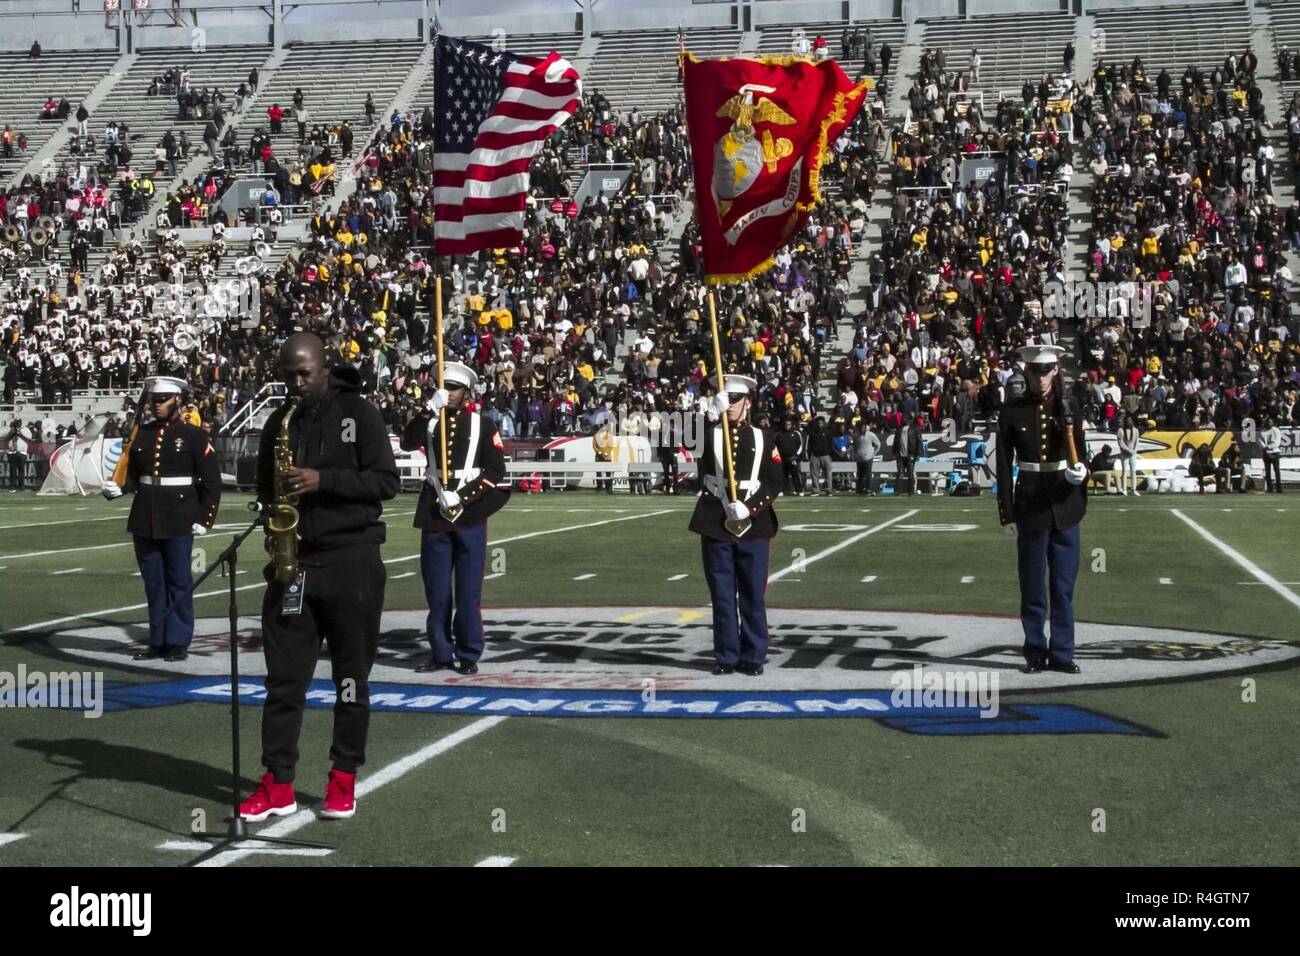 Marines with 4th Combat Engineer Battalion, 4th Marine Division, based out of Bessemer, Alabama, present the colors while world-renowned saxophonist Mike Phillips performs the national anthem at the Magic City Classic, in Birmingham, Alabama, Oct. 27, 2018.  The Magic City Classic is a 77-year-old college football rivalry between Alabama A&M University and Alabama State University, the two largest historically black universities in the state. The Marine Corps participates in the rivalry to foster a positive relationship with the community and illustrate a parallel between the indelible fightin Stock Photo